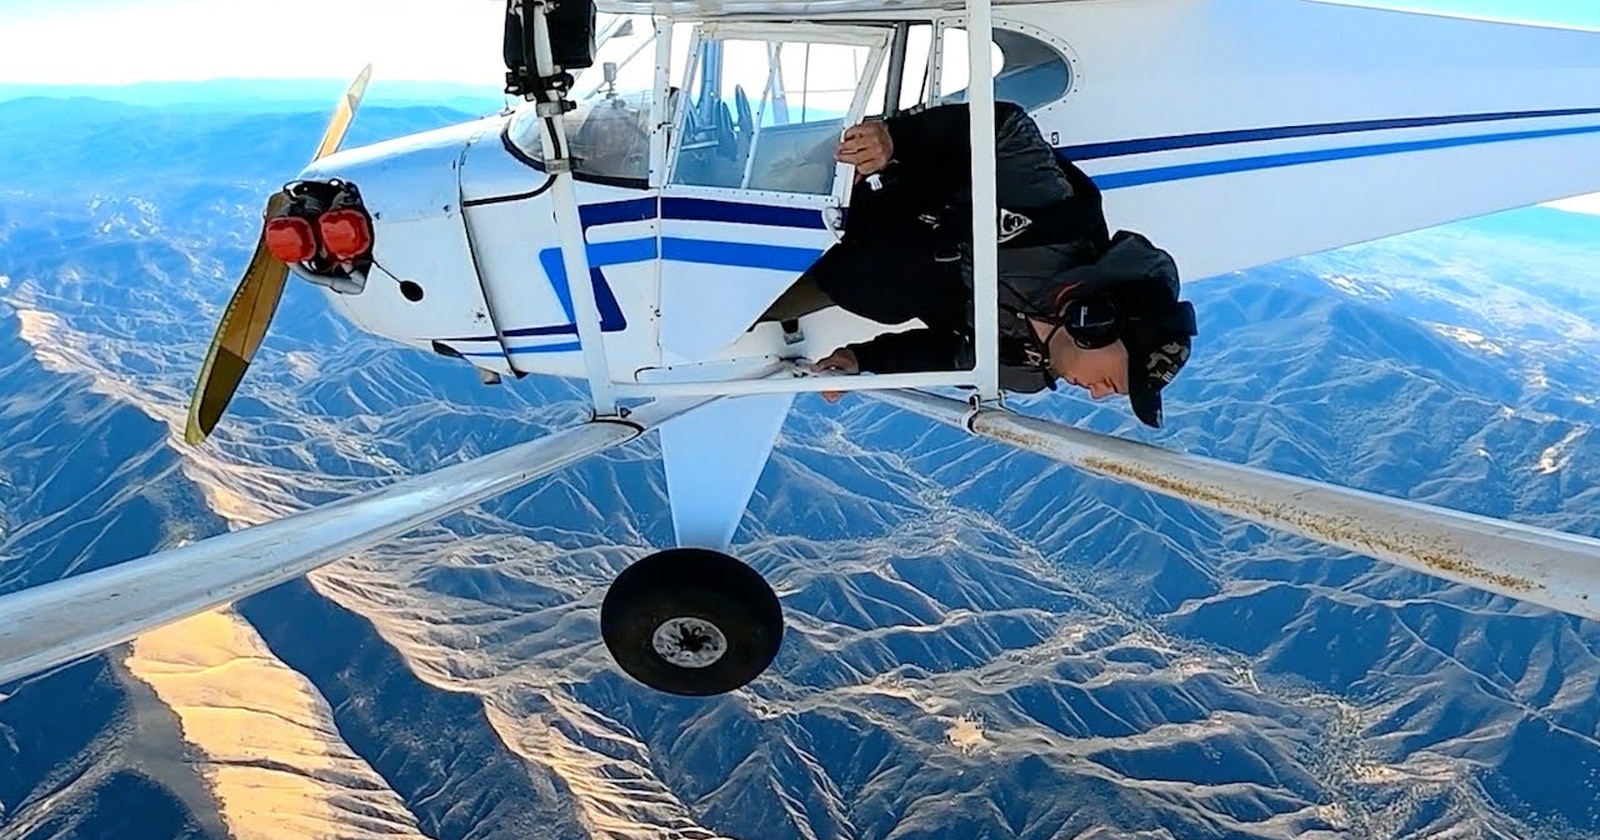 Influencer Intentionally Crashed His Plane on Camera, FAA Rules